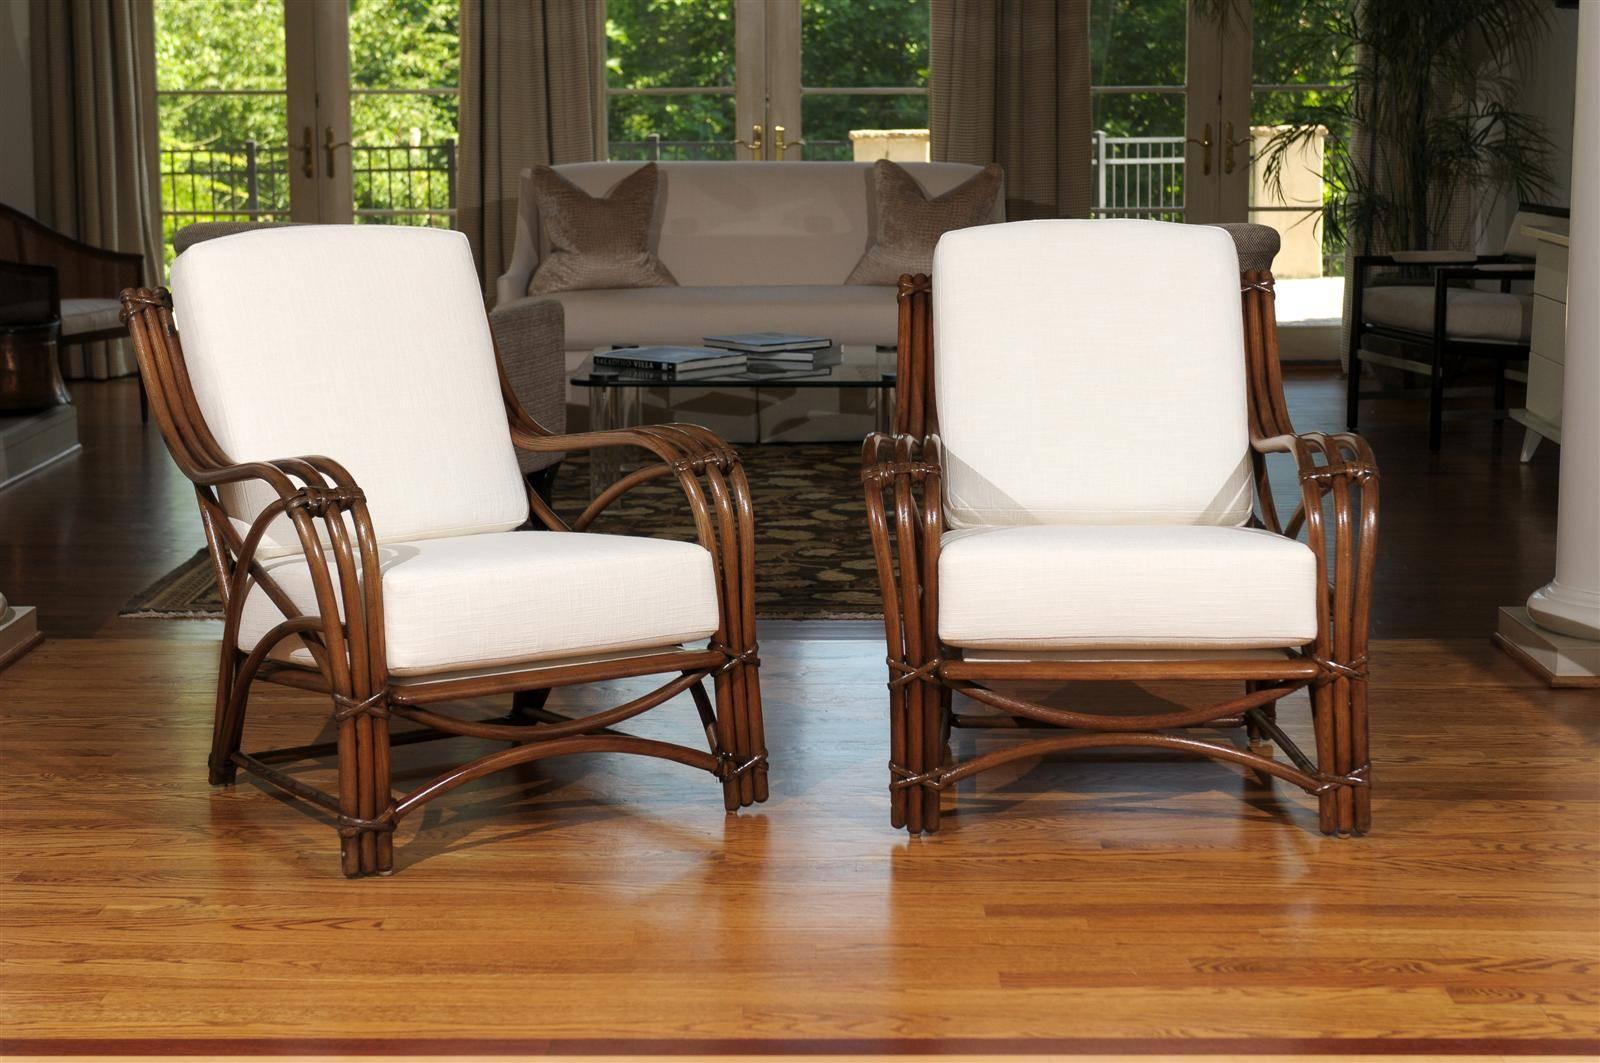 A beautiful pair of lounge or club chairs, circa 1950. Designed to give the appearance of rattan, the chairs are actually made from bent oak. Chair bindings and detail are in rattan. Stout and exceptionally crafted. Matching three-seat sofa also